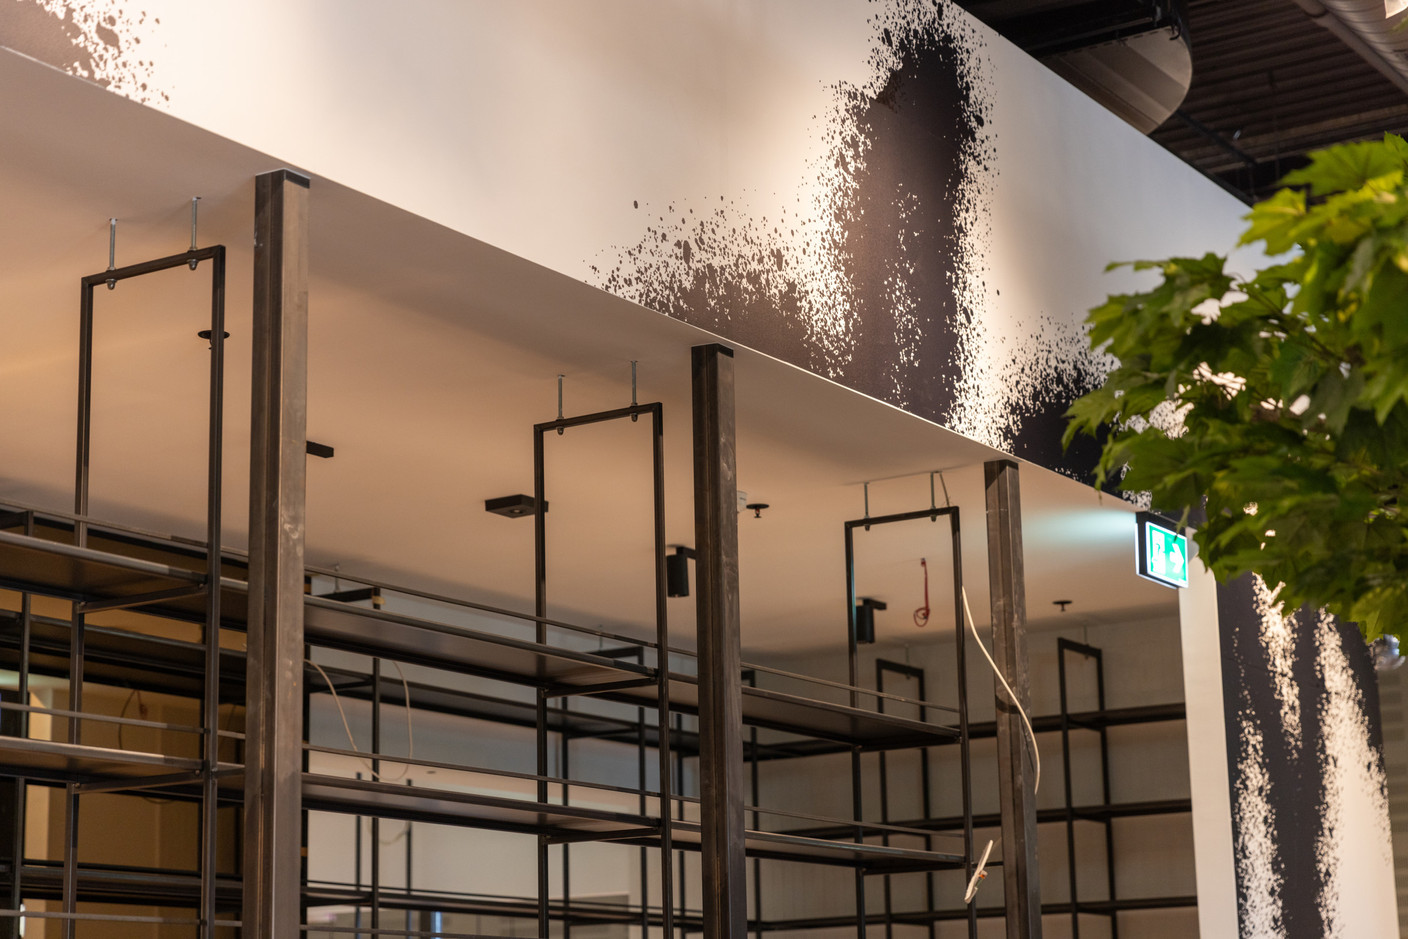 With its kitchens opening onto a vast 2,000m2 hall, the restaurant area formerly occupied by a Cactus Inn has been transformed under the supervision of interior designer Véronique Witmeur. Photo: Romain Gamba/Maison Moderne